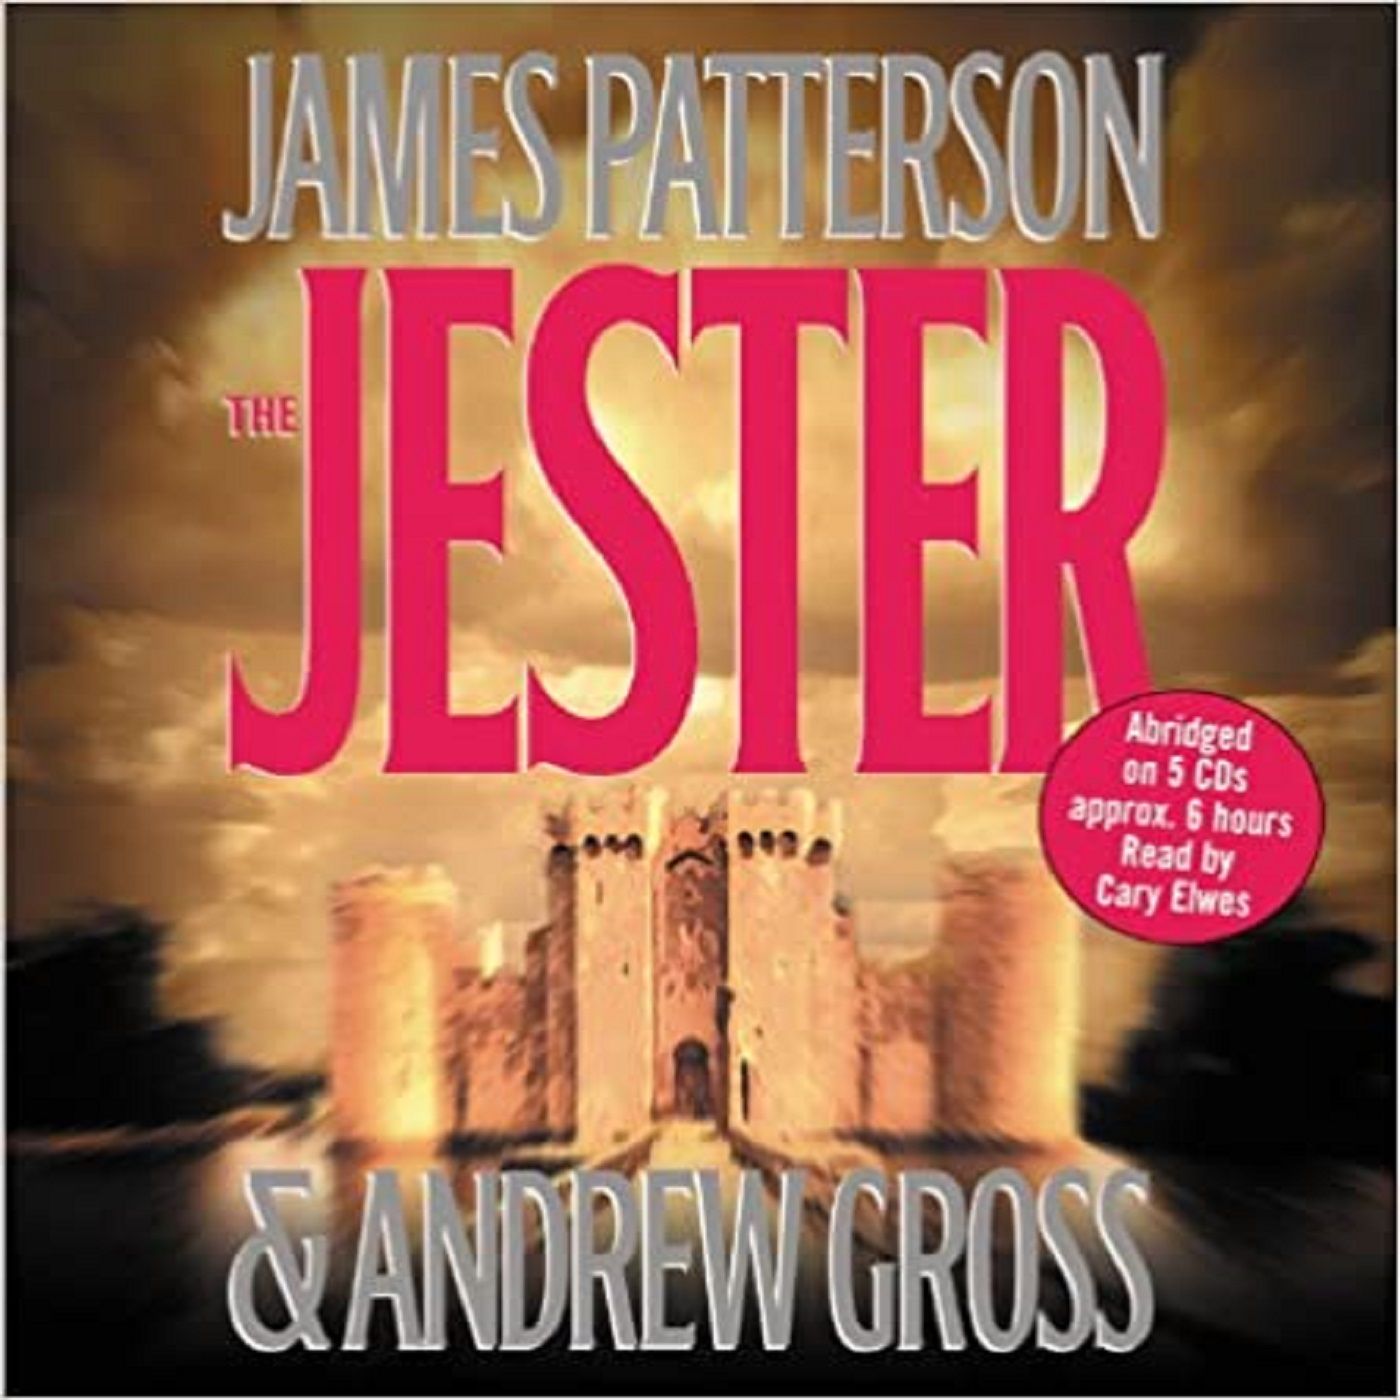 "The Jester" by James Patterson ch2